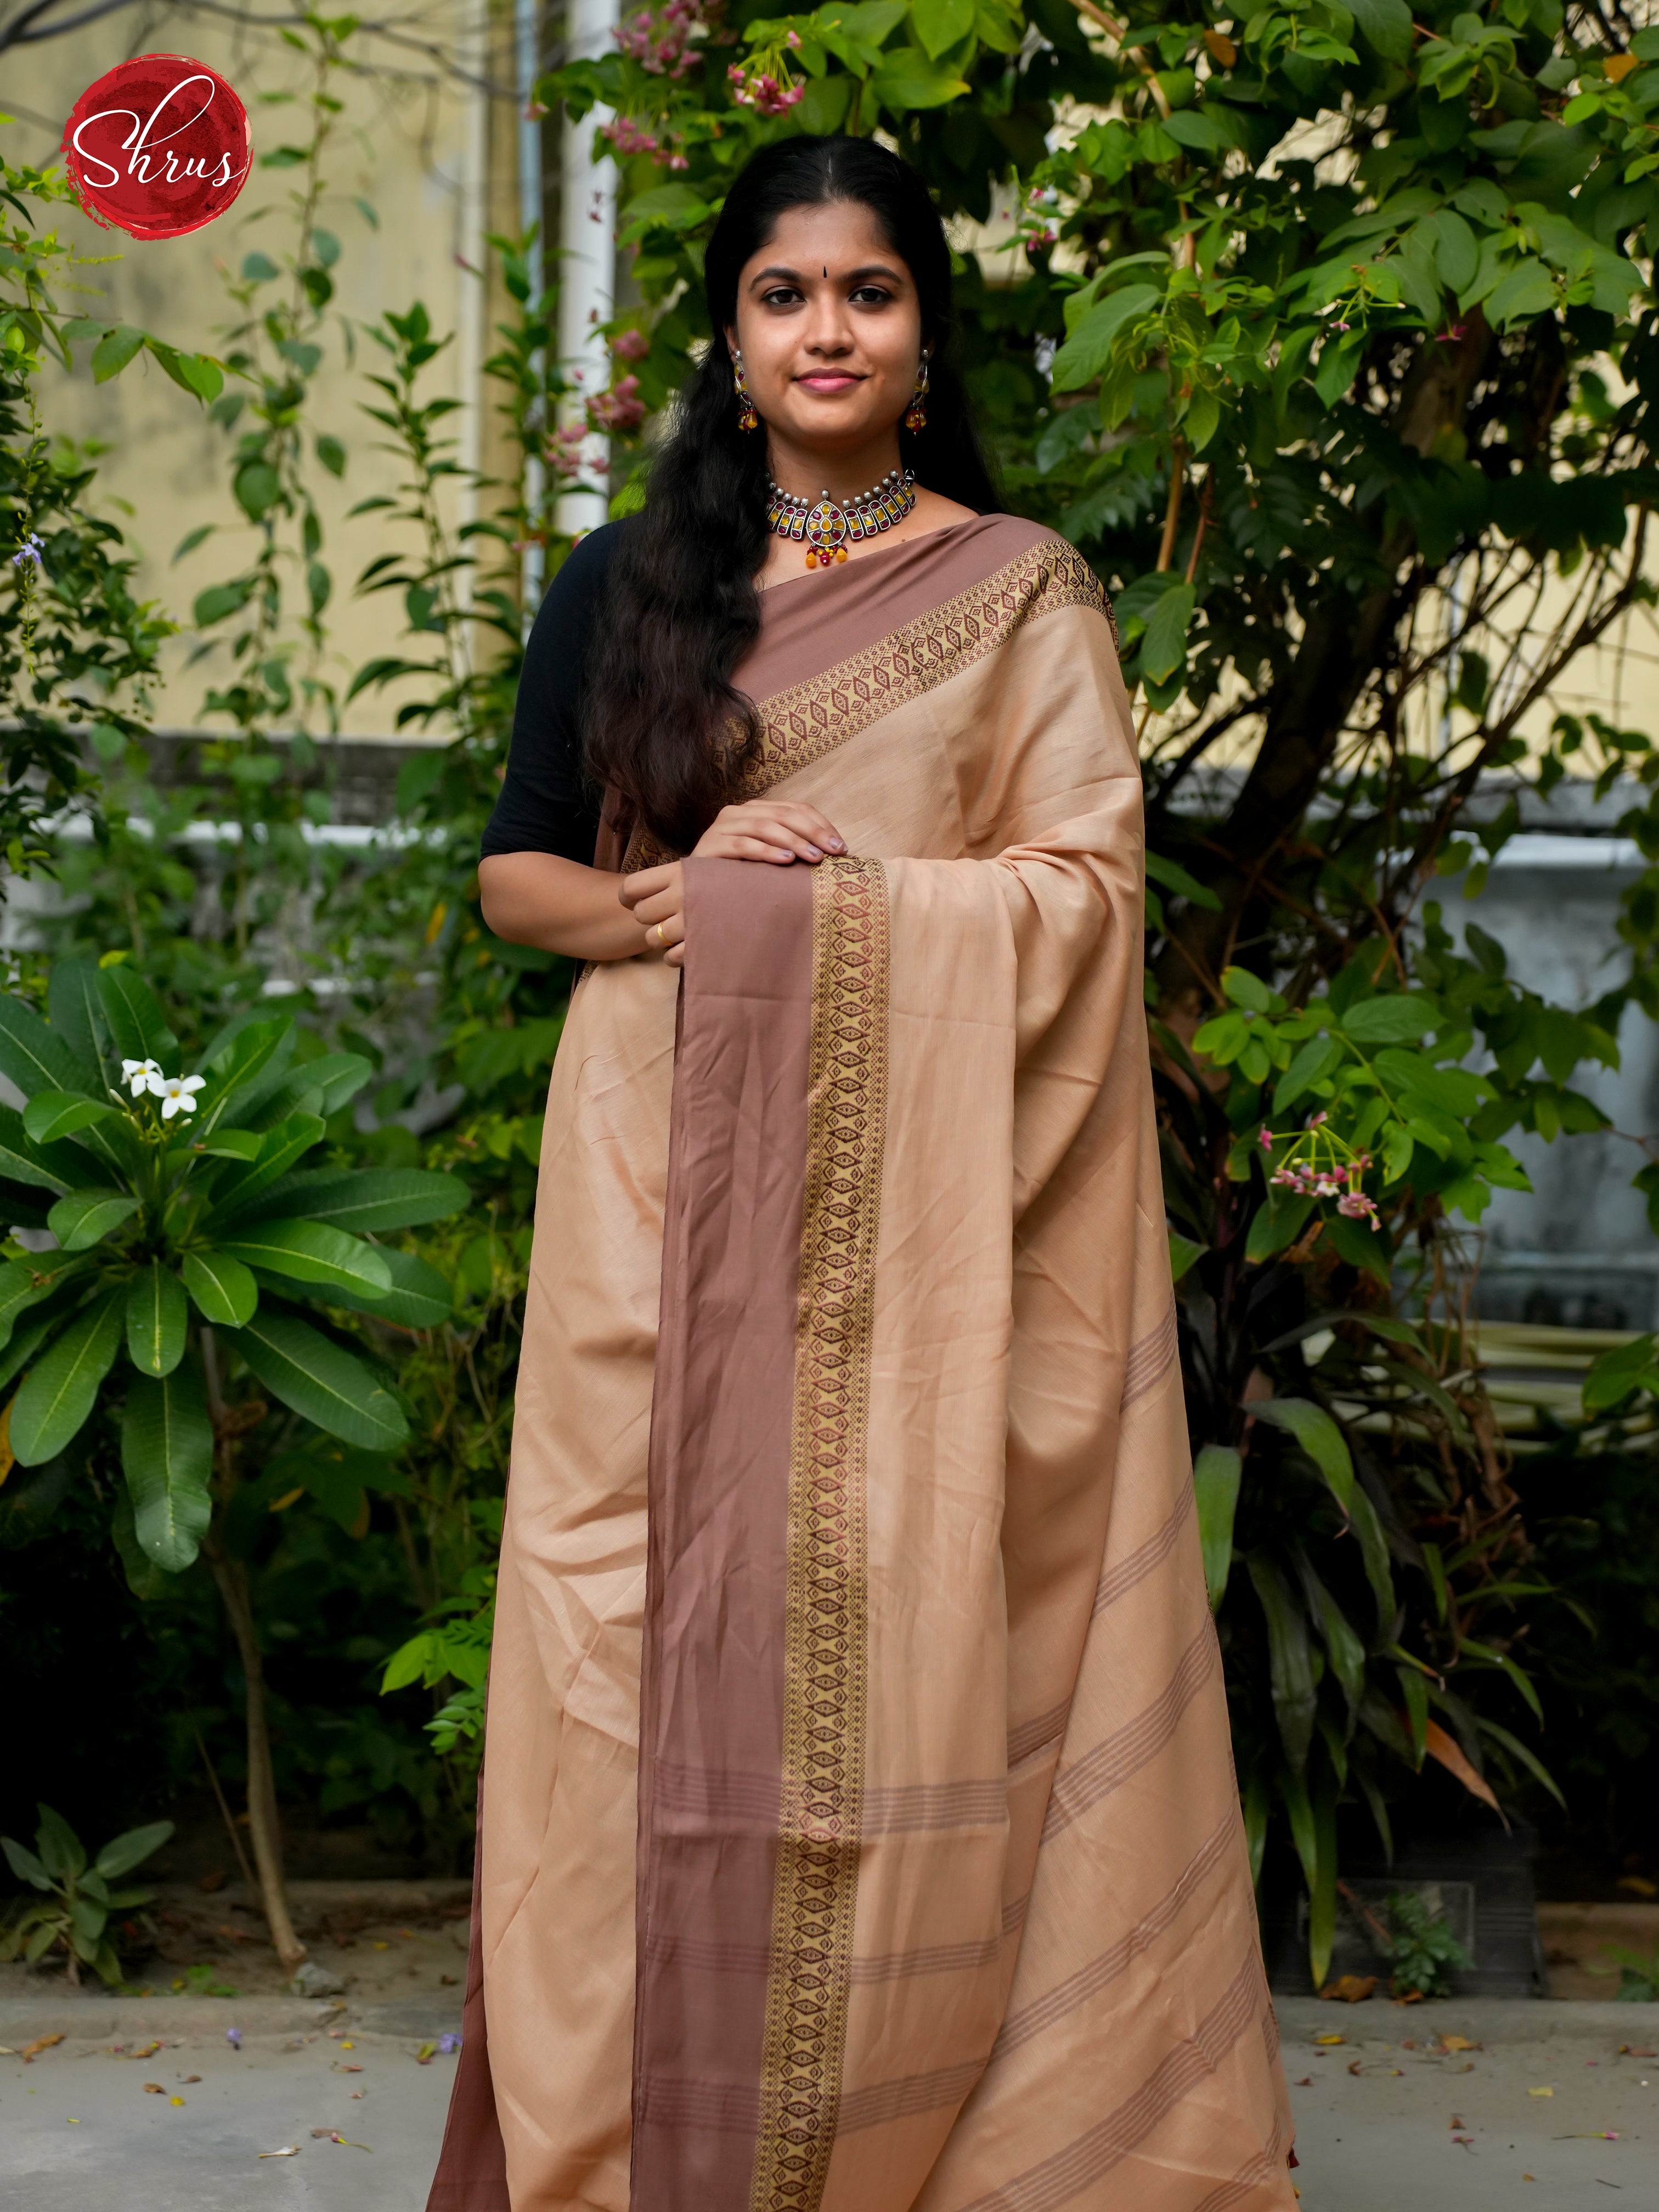 Dusty Brown & Brown - Bengal cotton Saree - Shop on ShrusEternity.com